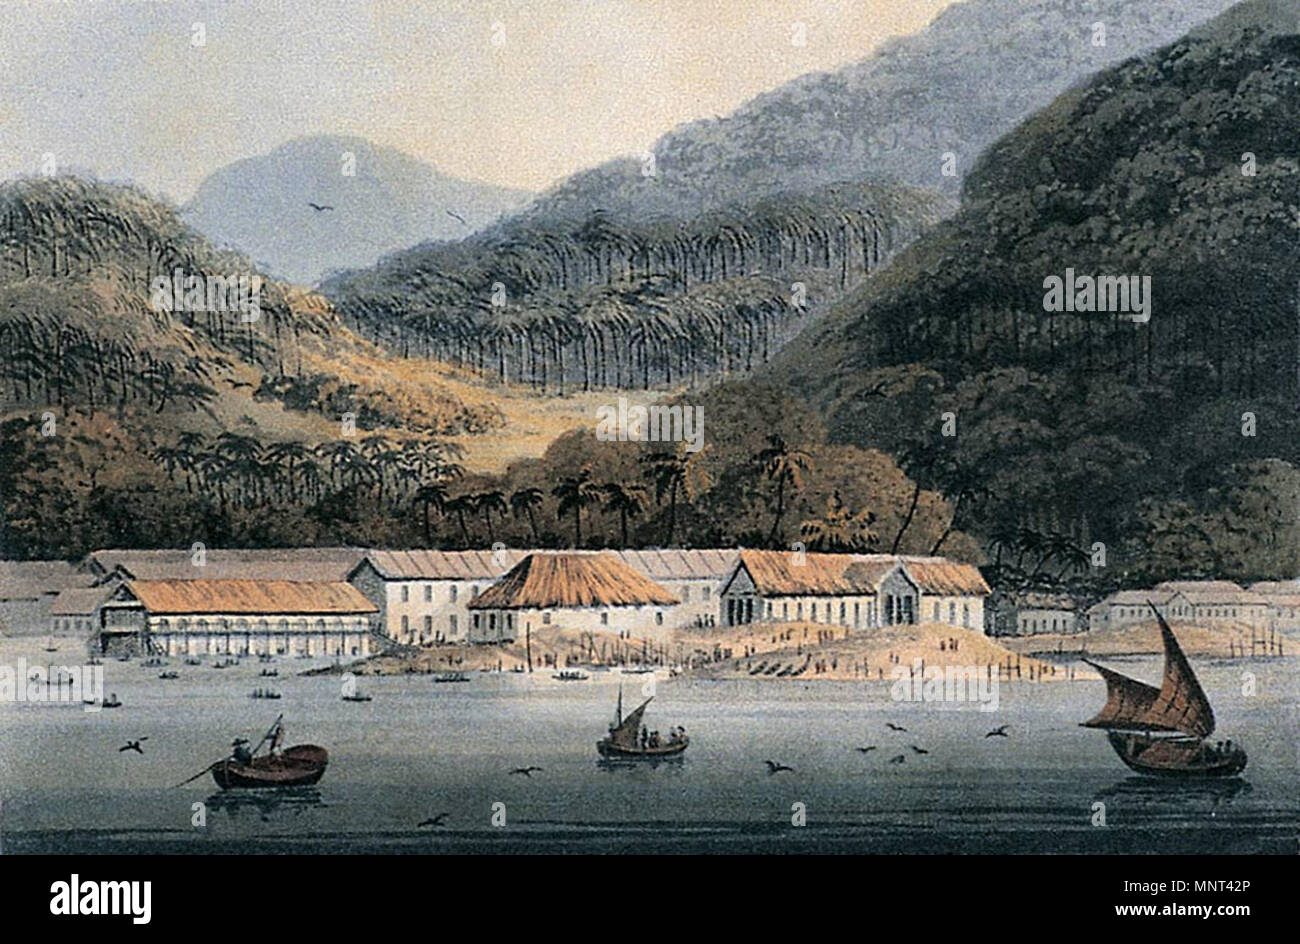 . English: Source: http://www.penangmuseum.gov.my/museum/sites/default/files/portfolio images/N171b.jpg Title: George Town near Pulo Penang Media: Print 1814 Width: 218 mm (8.6 in) Height: 144 mm (5.7 in) Year of creation: 1811 . 1811. Penang State Museum and Art Gallery 972 Penang Museum historical painting N171b Stock Photo